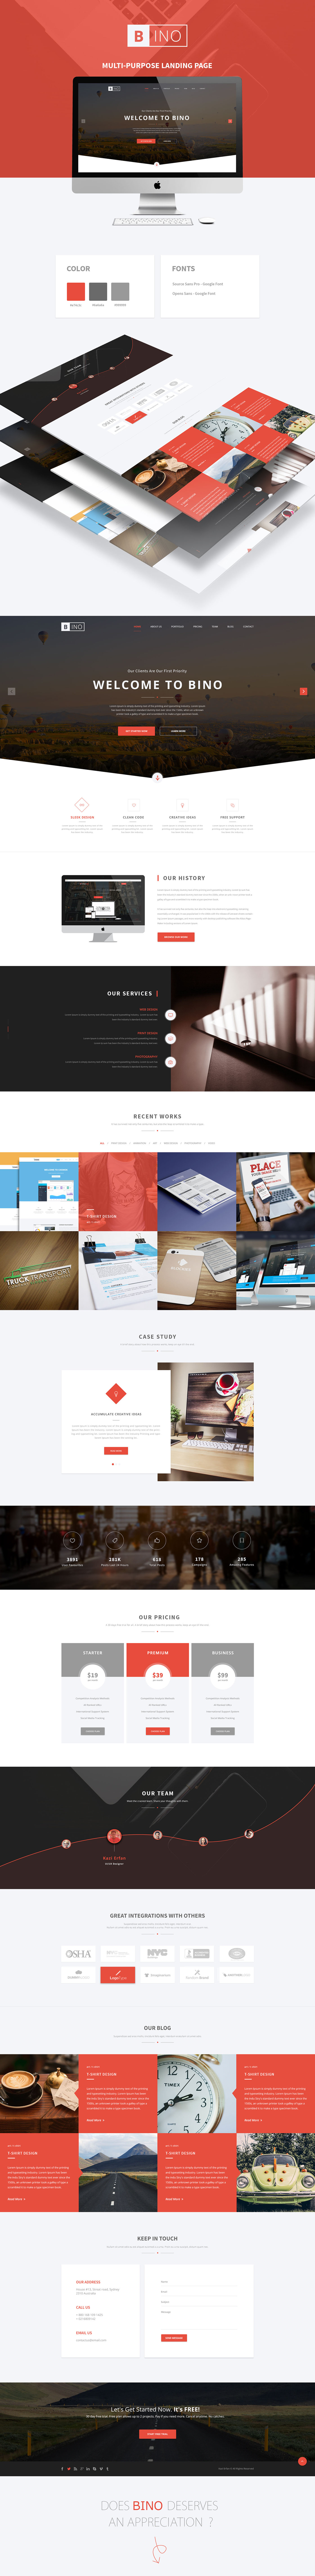 ux UI download free professional corporate material landing page creative freebie